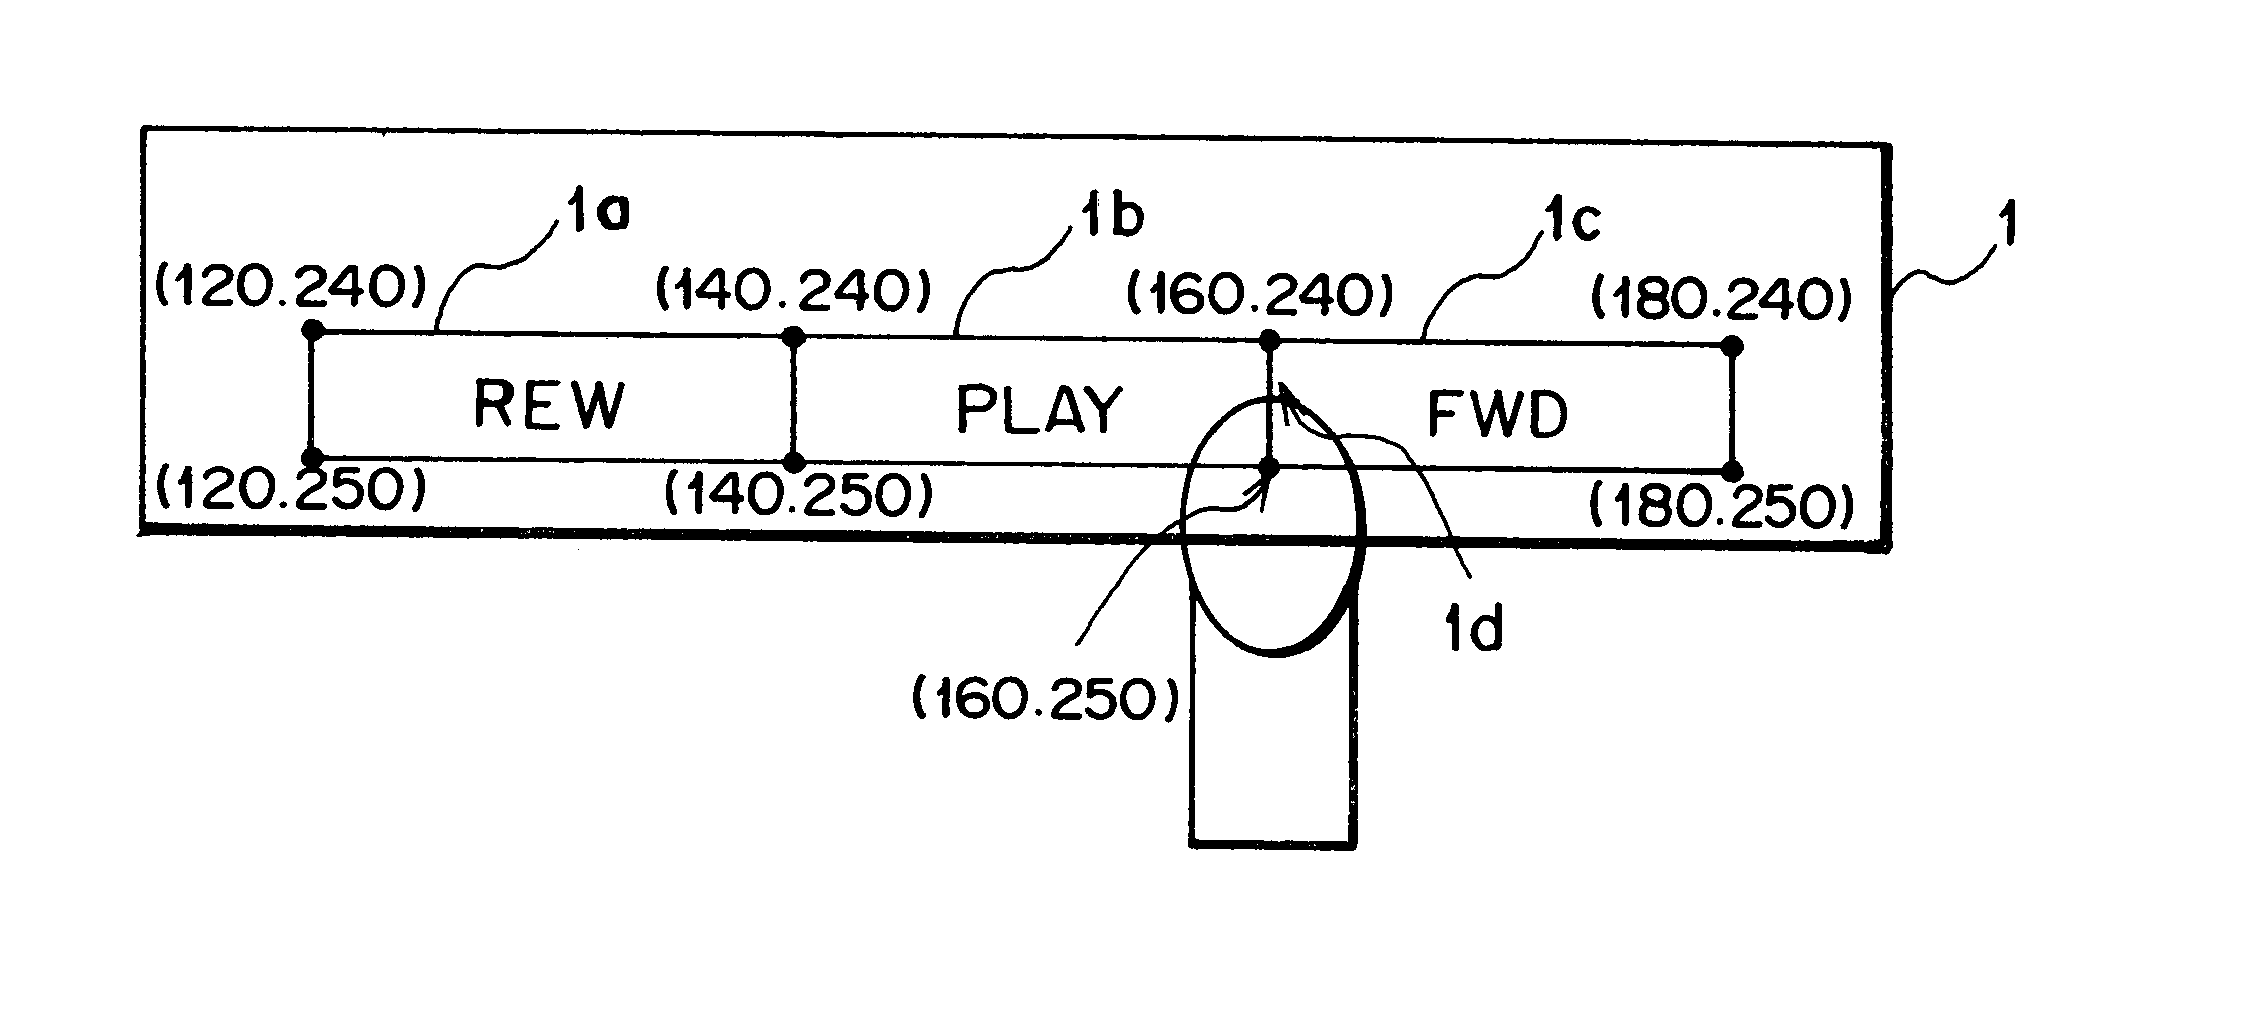 Operating device for controlling electronic devices utilizing a touch panel